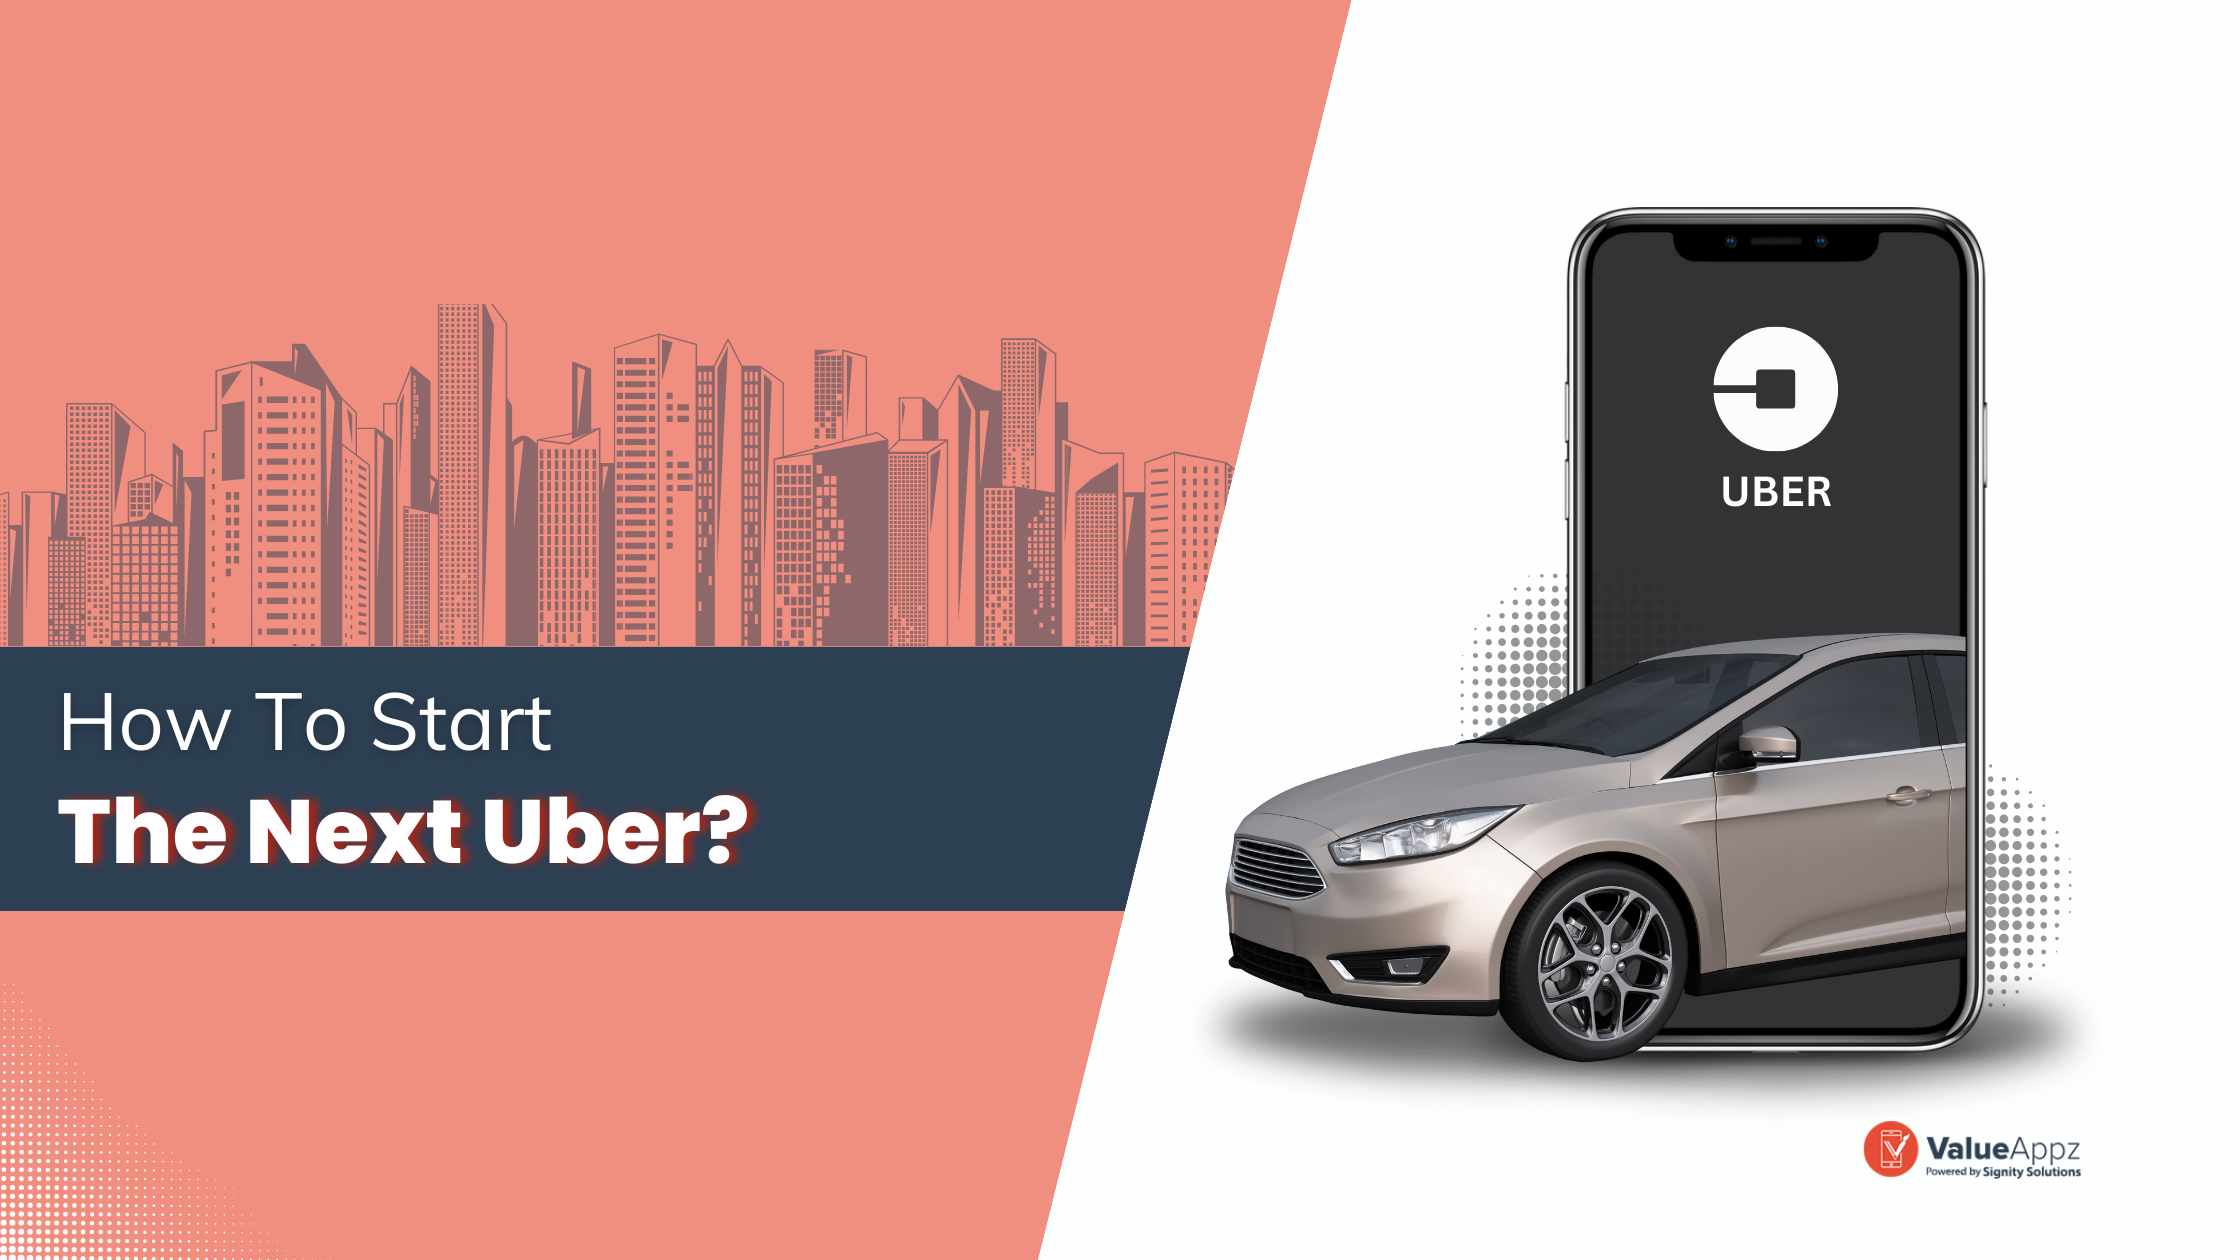 how to build an app like uber